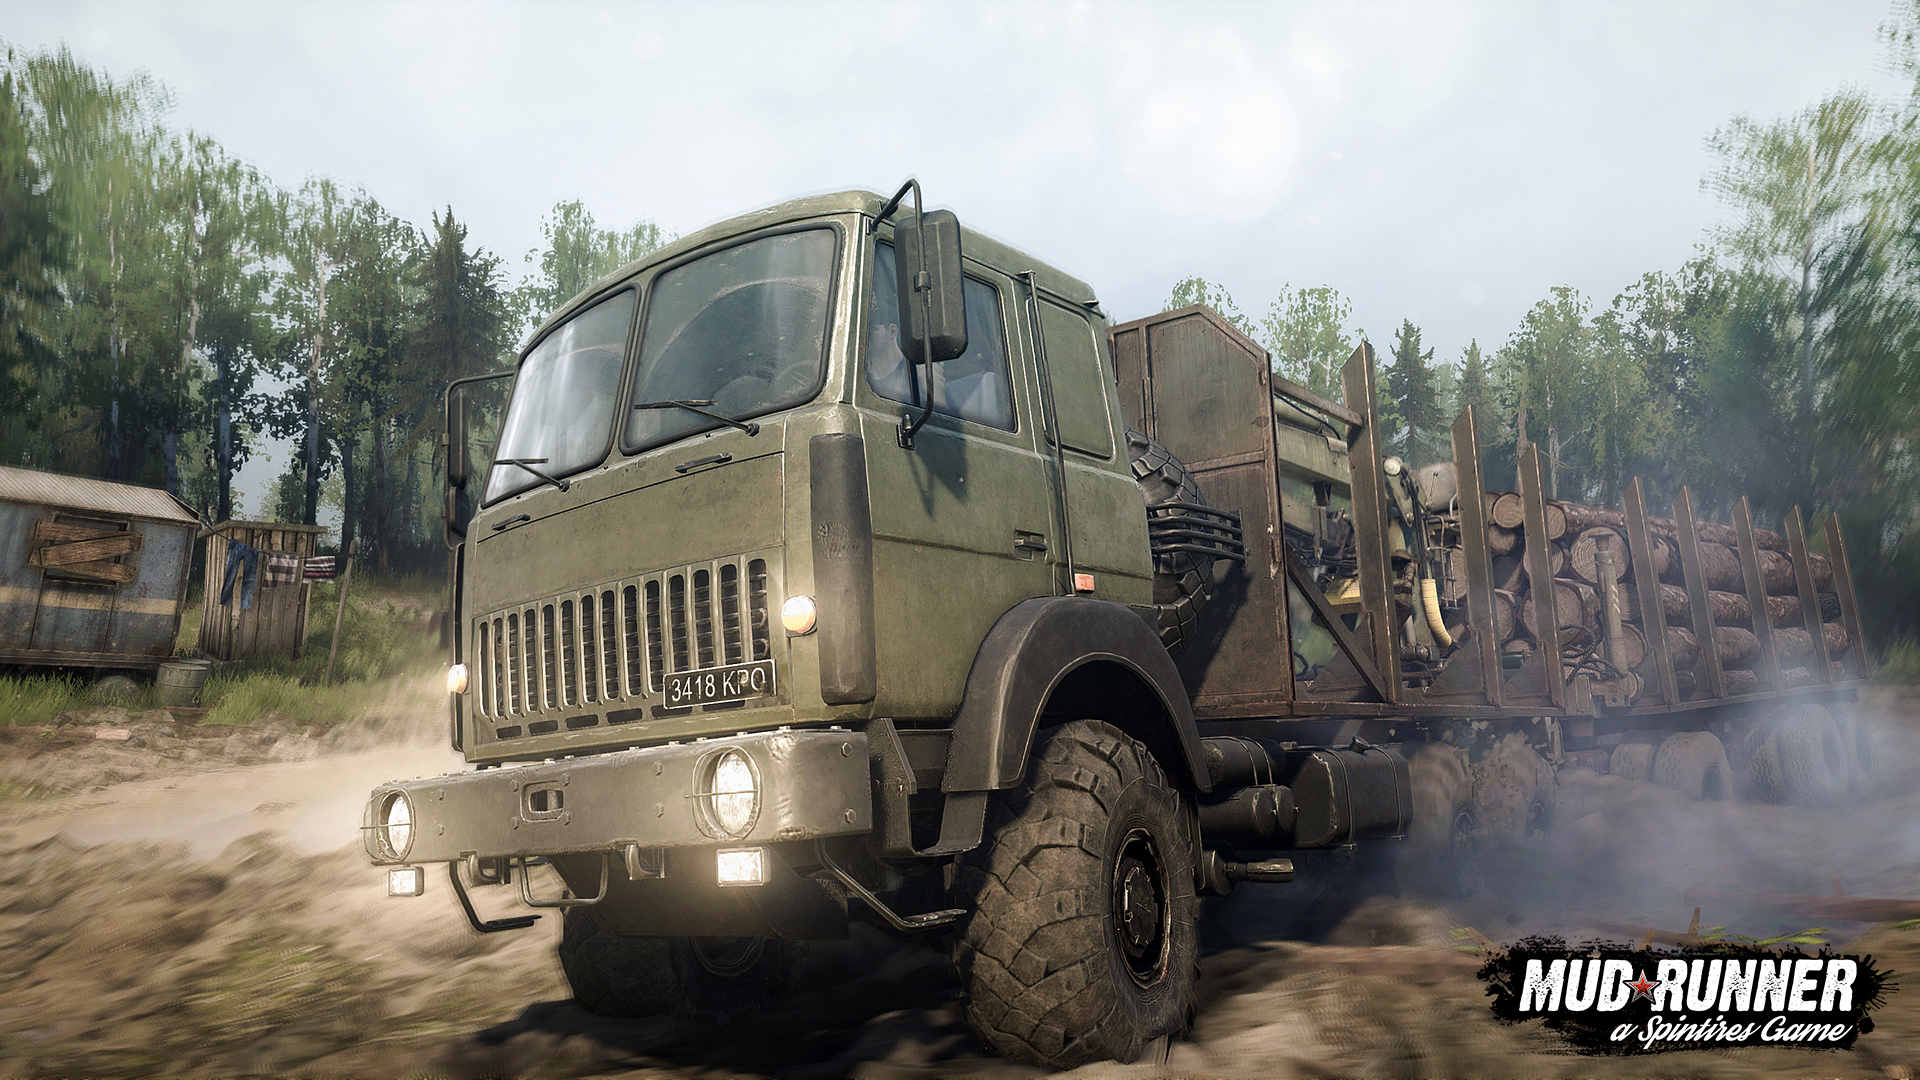 spintires for mac free download